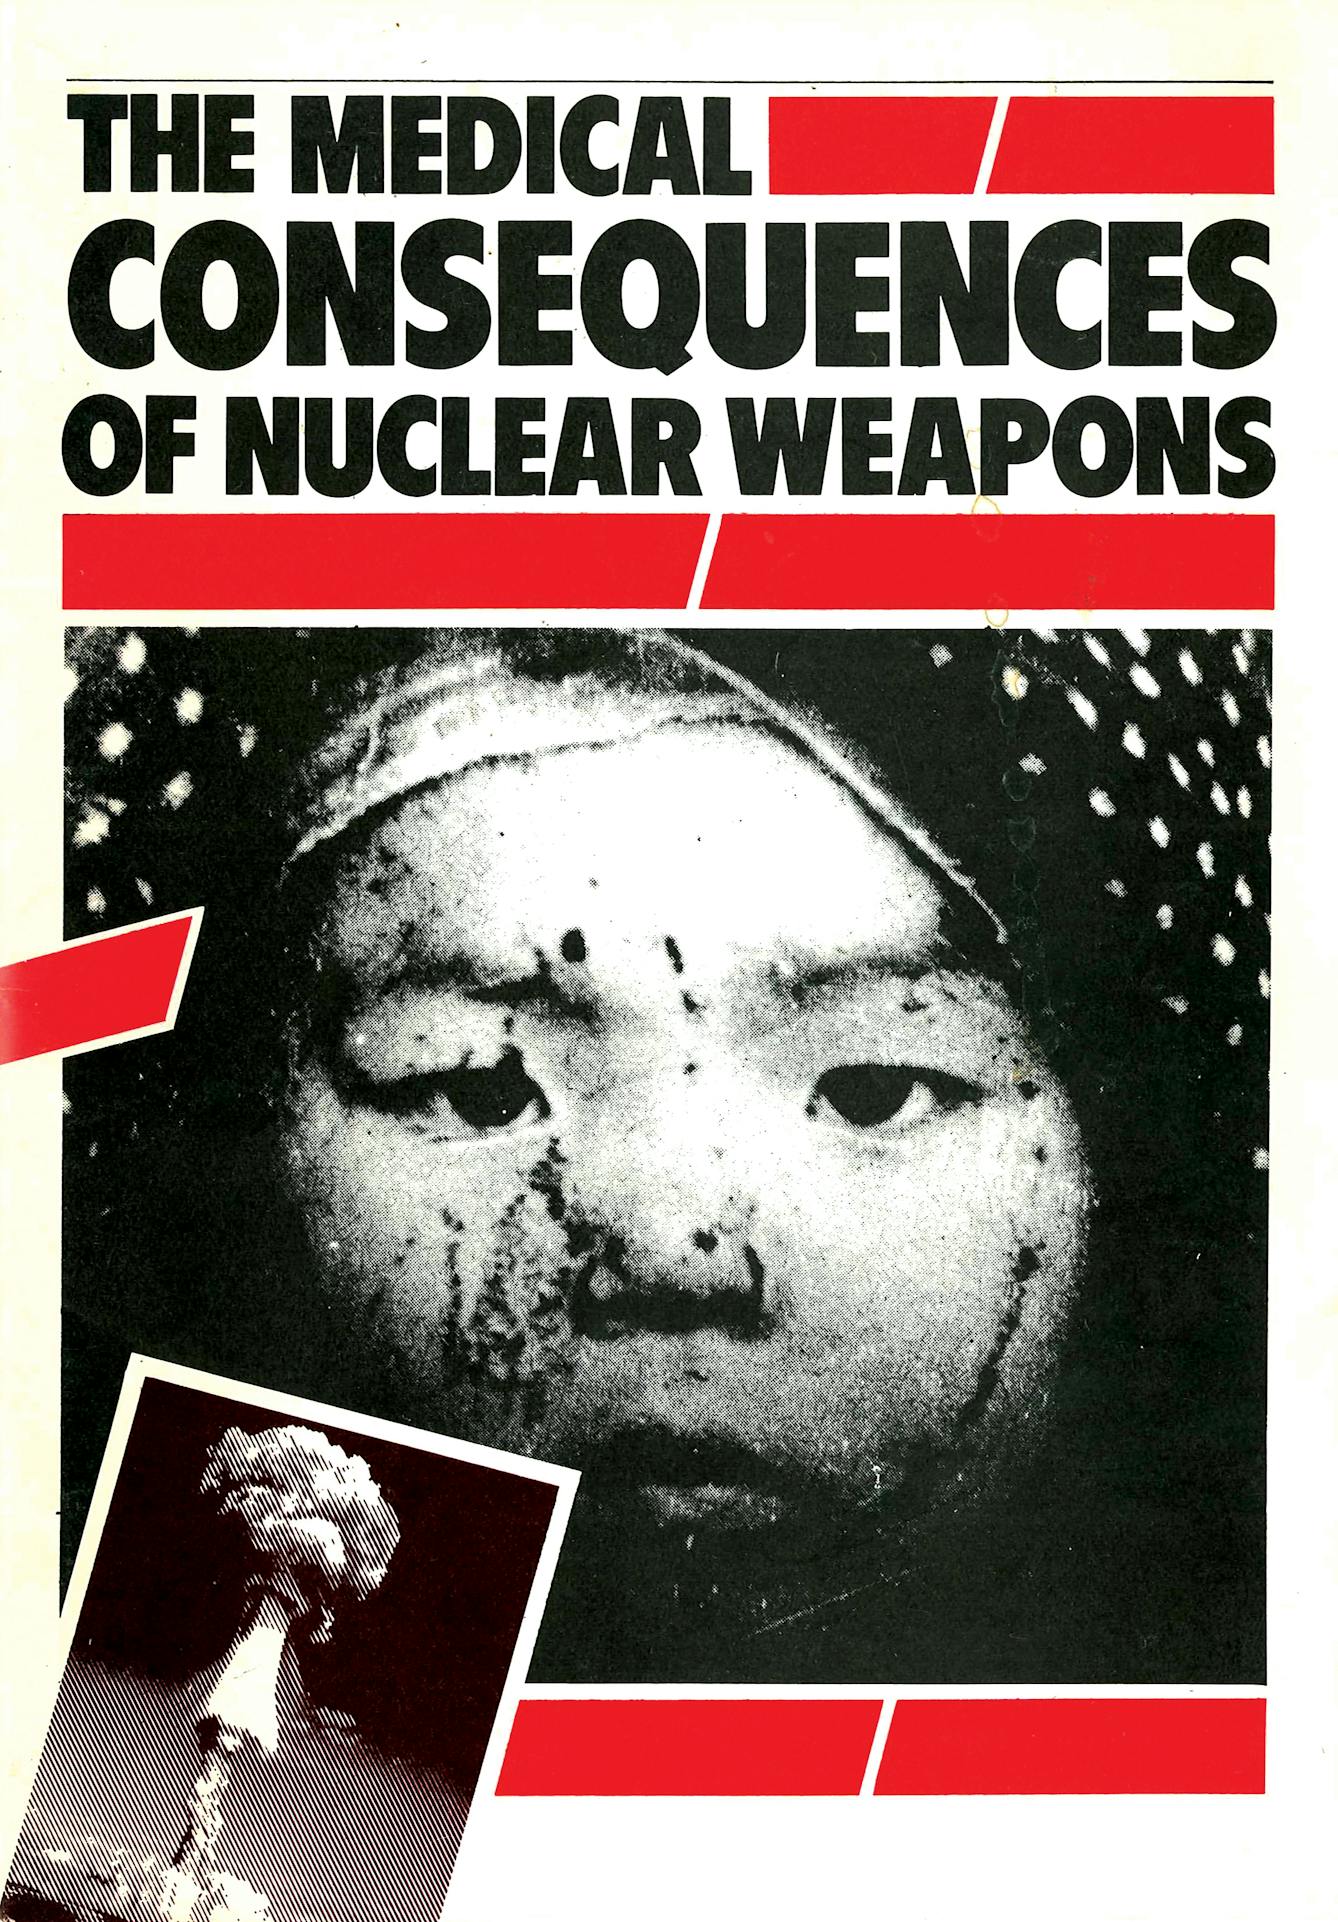 Cover of a pamphlet: ‘The Medical Consequences of Nuclear Weapons’